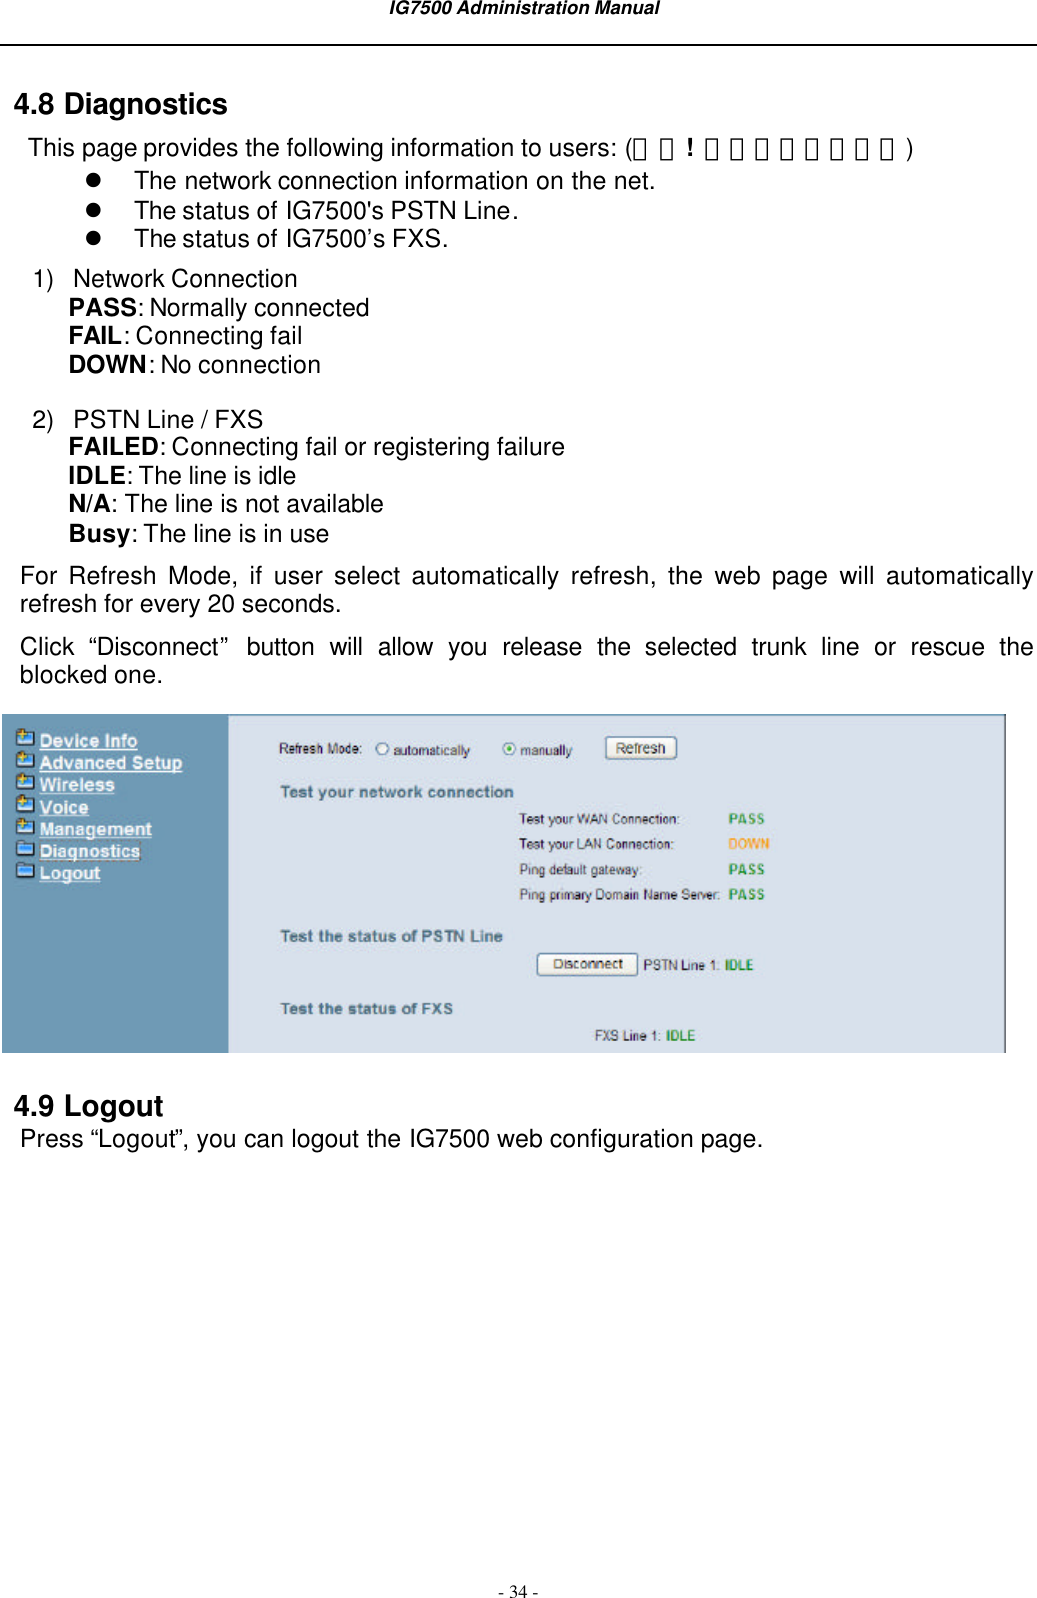  IG7500 Administration Manual  - 34 - 4.8 Diagnostics This page provides the following information to users: (錯誤!  找不到參照來源。) l The network connection information on the net. l The status of IG7500&apos;s PSTN Line. l The status of IG7500’s FXS. 1) Network Connection PASS: Normally connected FAIL: Connecting fail DOWN: No connection 2) PSTN Line / FXS FAILED: Connecting fail or registering failure IDLE: The line is idle N/A: The line is not available Busy: The line is in use For  Refresh Mode, if user select automatically refresh, the web page will automatically refresh for every 20 seconds. Click “Disconnect” button will allow you release the selected trunk line or rescue the blocked one.    4.9 Logout Press “Logout”, you can logout the IG7500 web configuration page.    